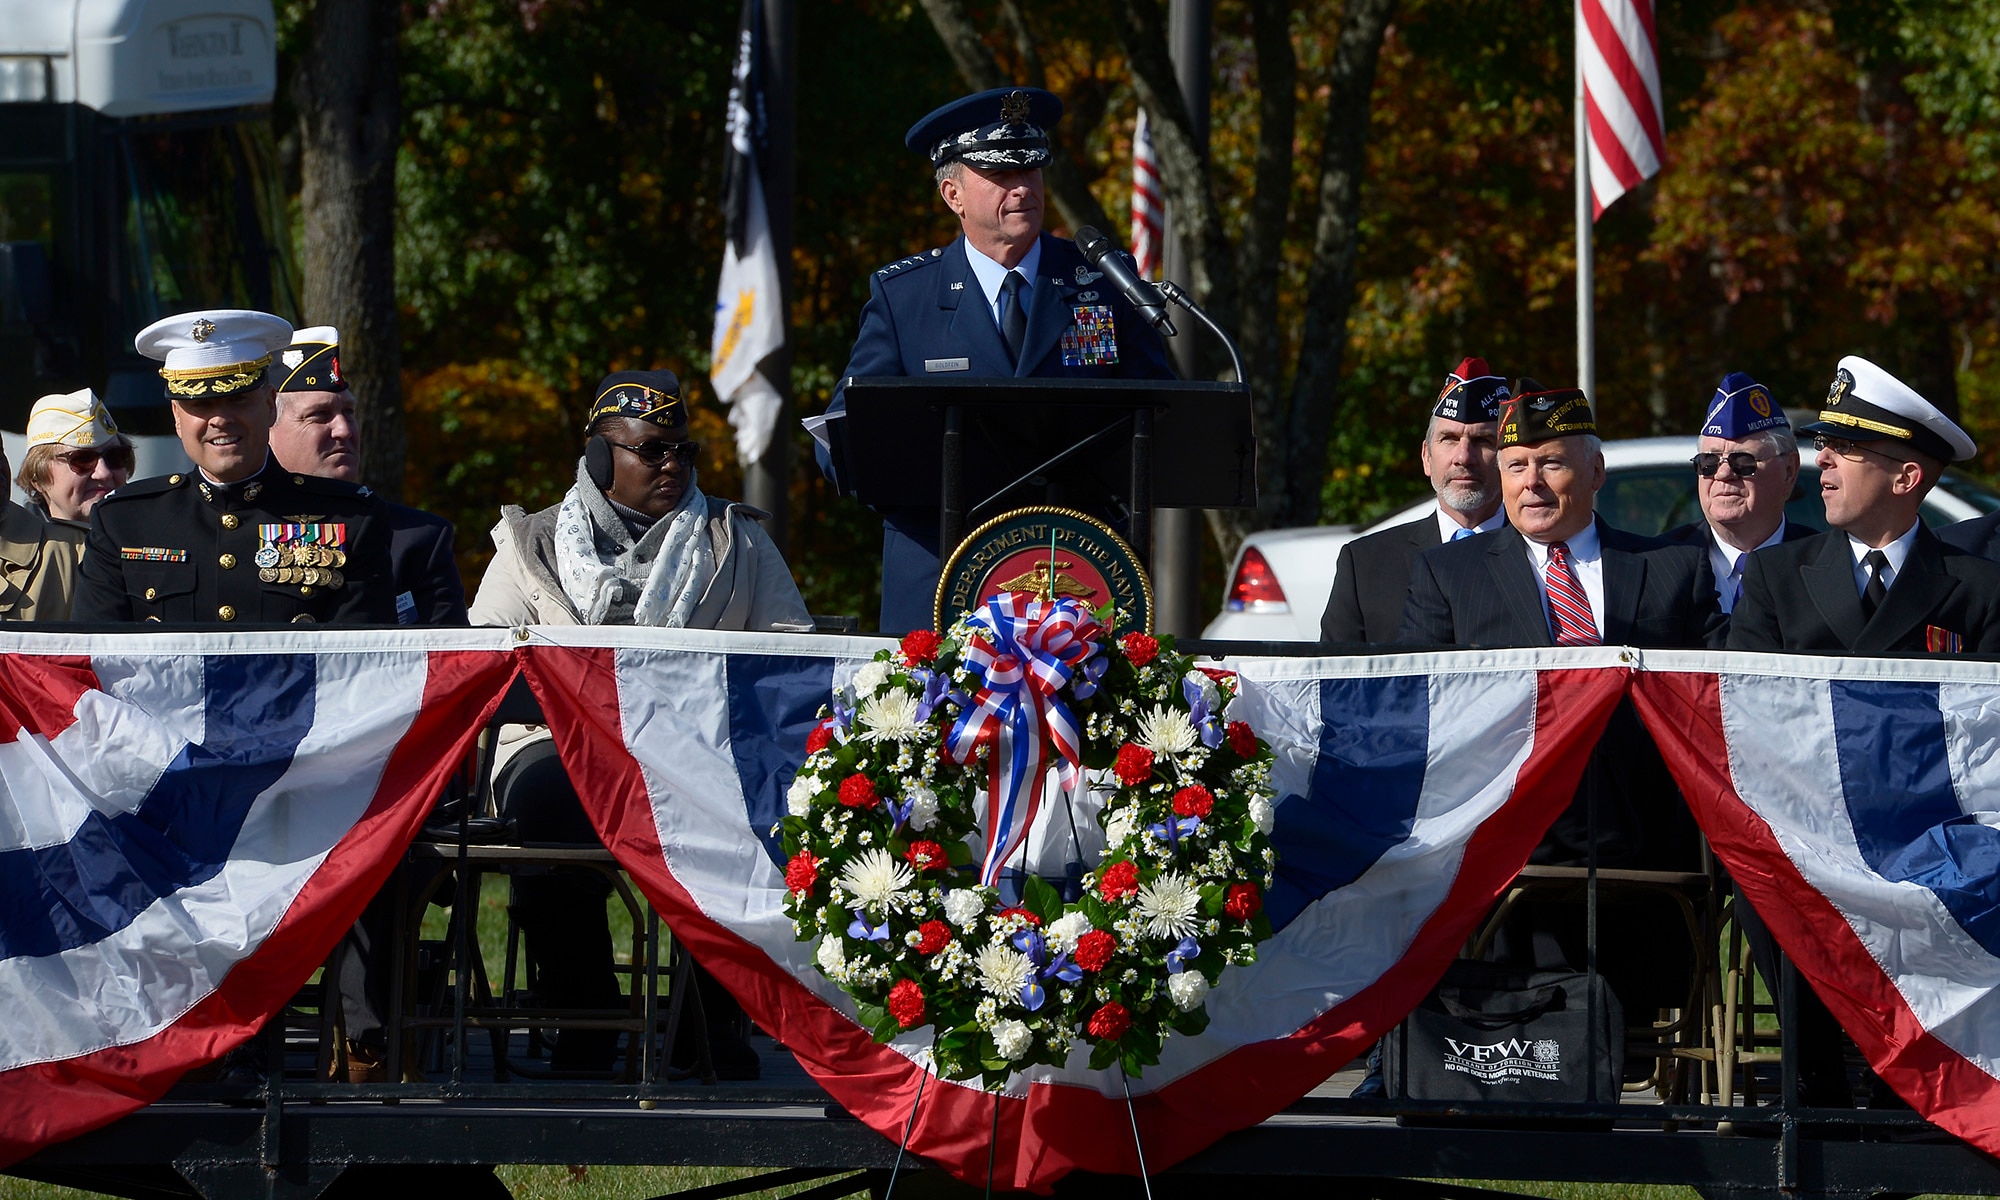 Air Force Chief of Staff Gen. David L. Goldfein delivers the keynote speech during a Veterans Day ceremony at Quantico National Cemetery in Quantico, Va., Nov. 11, 2017. The Veterans Day ceremony is an annual event hosted by the Potomac Region Veterans Council. The event featured a performance by the Quantico Marine Corps Band.  (U.S. Air Force photo by Tech. Sgt. Dan DeCook)